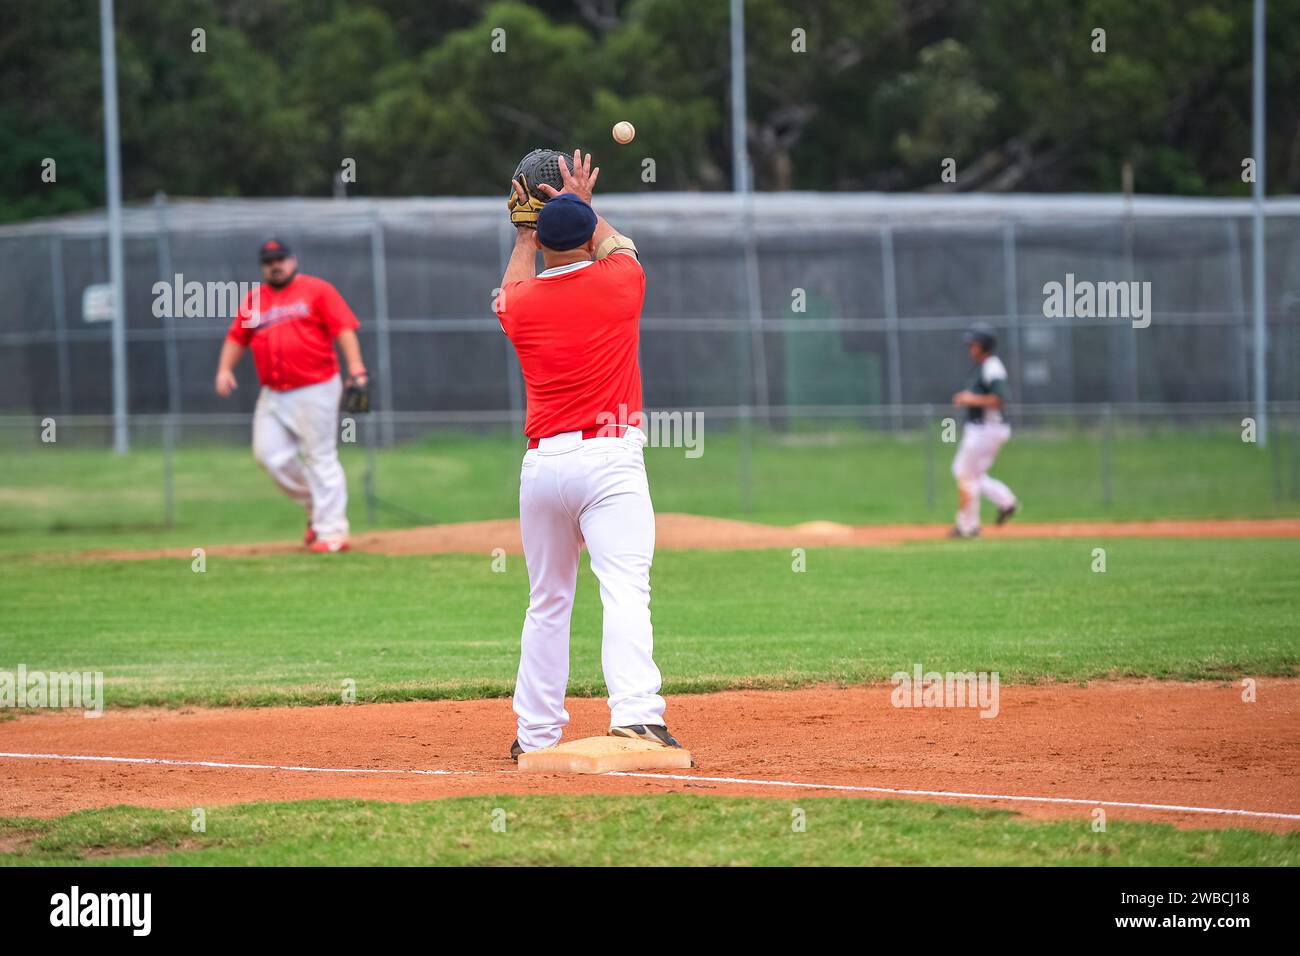 Baseball game, first baseman catching the ball thrown from the infielder during the baseball game. Stock Photo